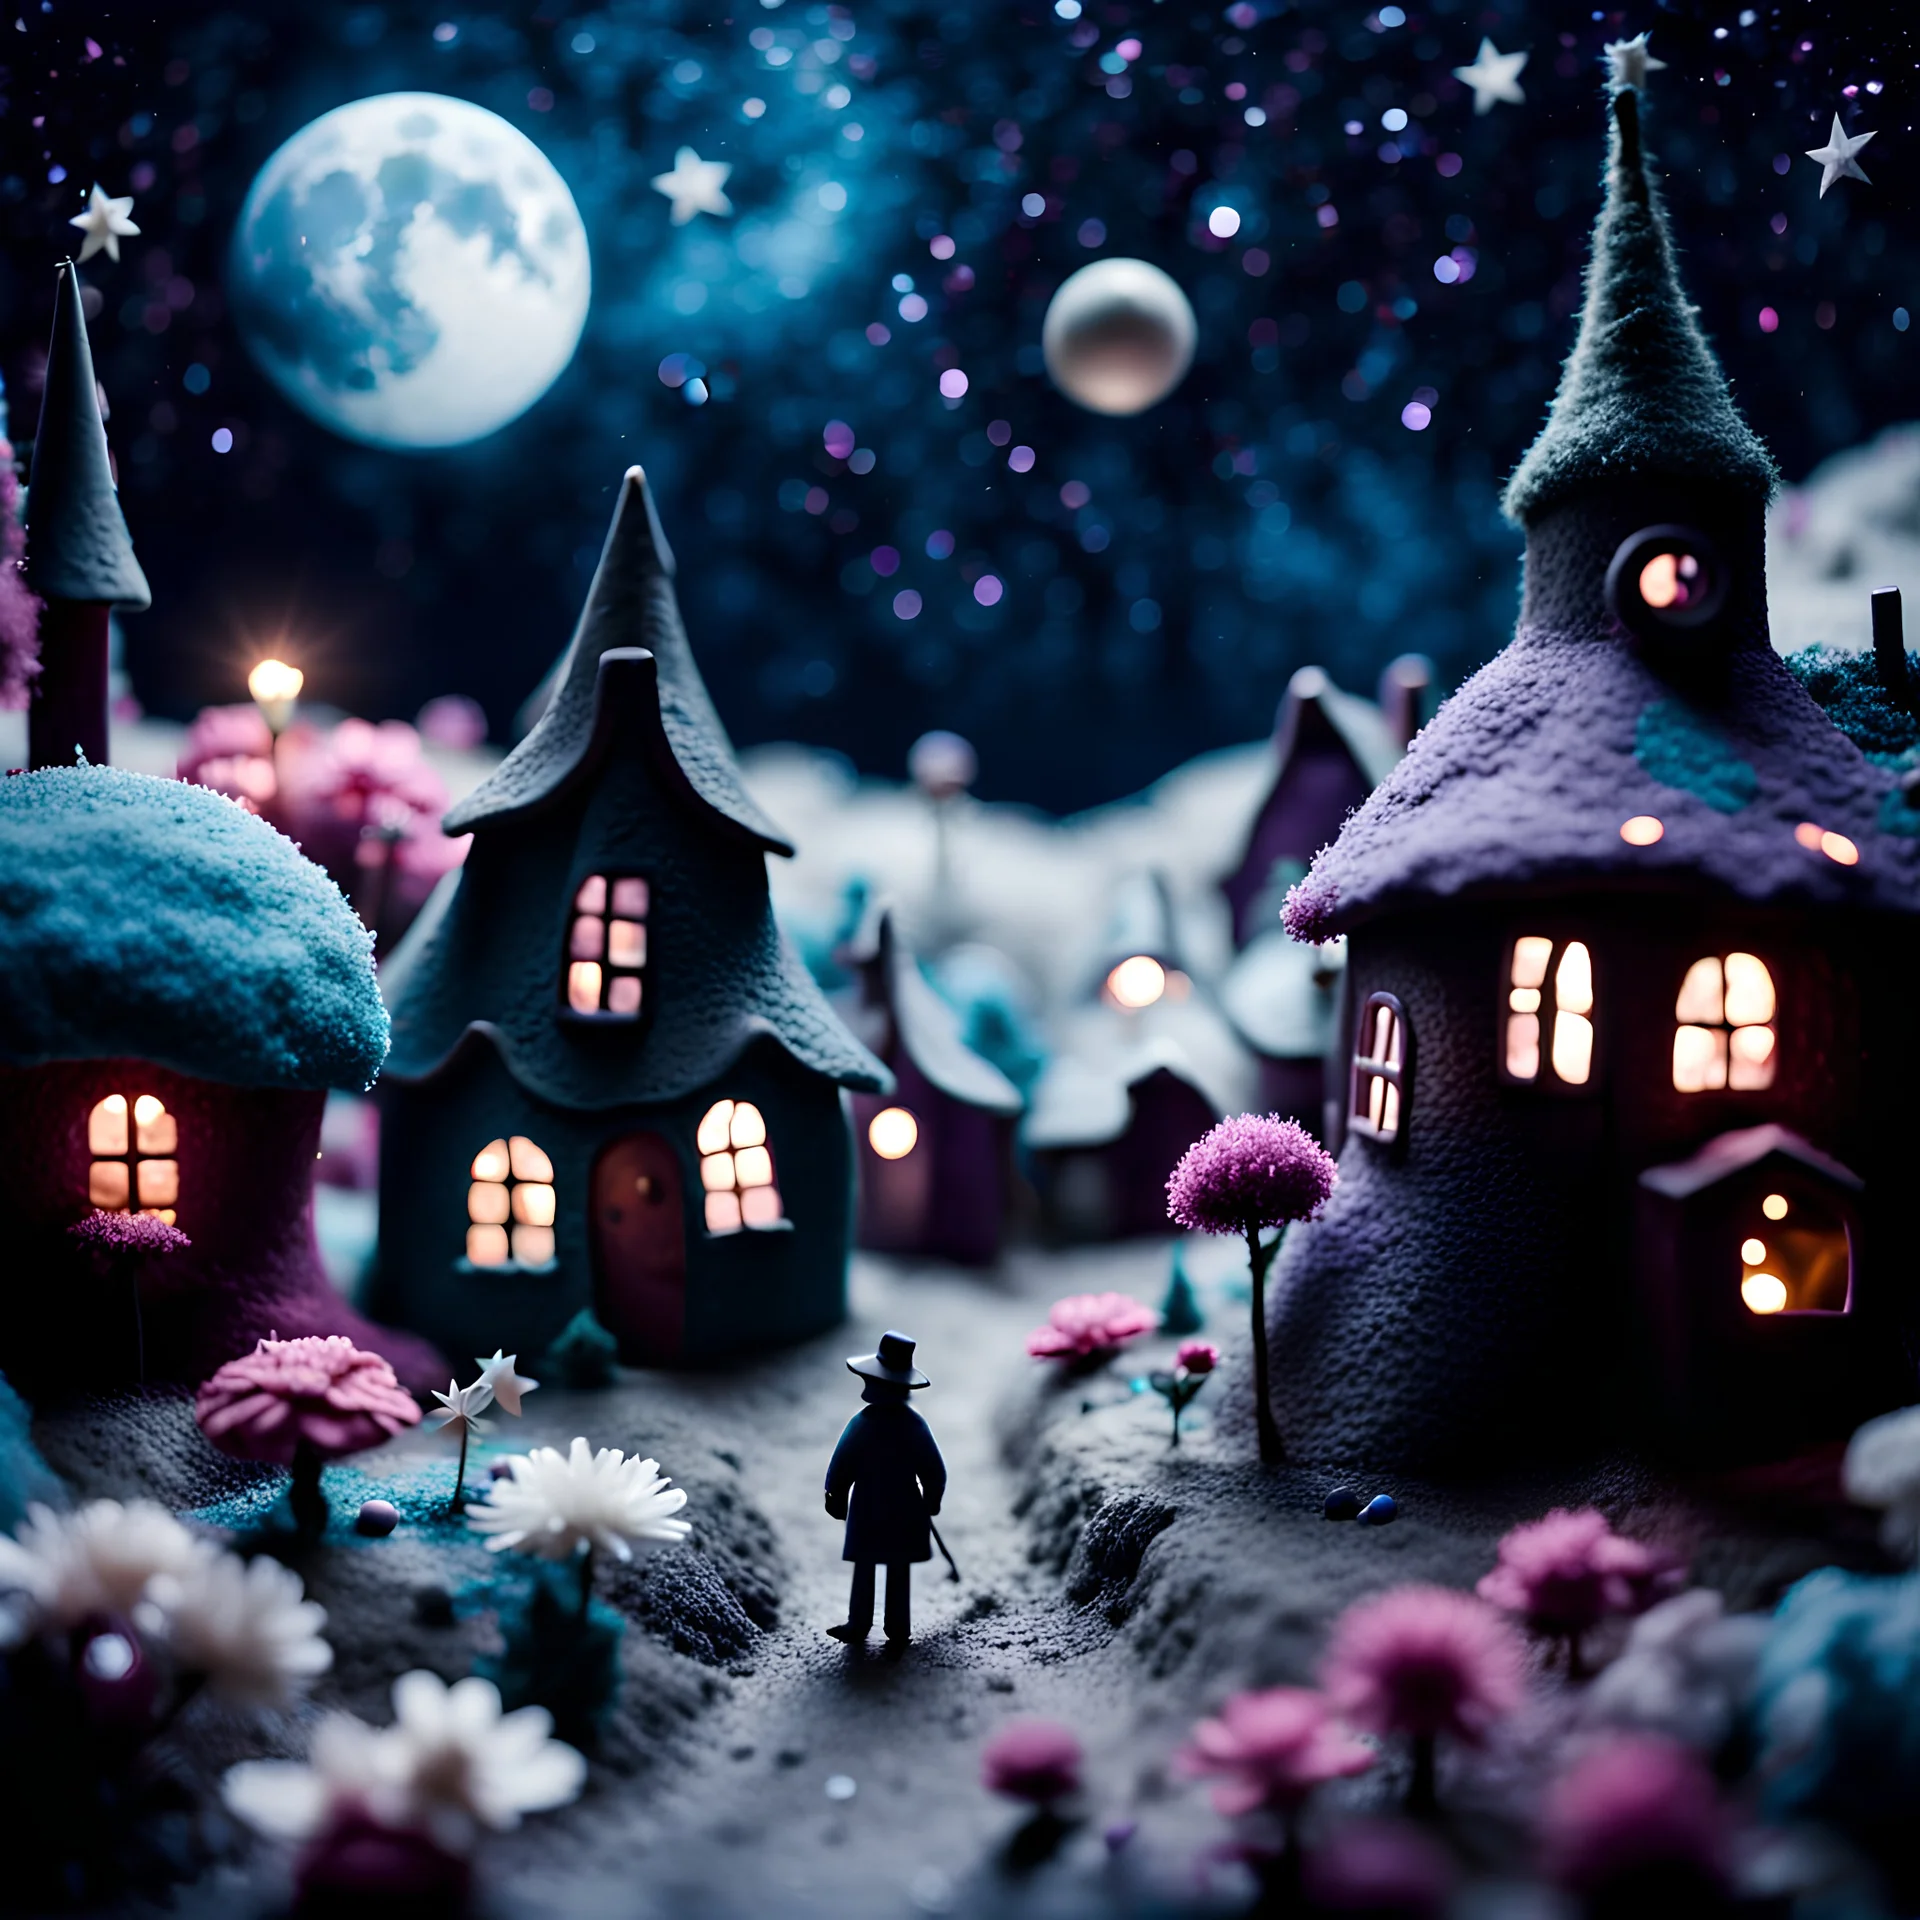 Detailed people, street made of modeling clay and felt, village, stars, galaxy and fog, planets, moon, volumetric light flowers, naïve, Tim Burton, strong texture, extreme detail, Yves Tanguy, decal, rich moody colors, sparkles, Harry Potter, bokeh, odd, shot on Ilford